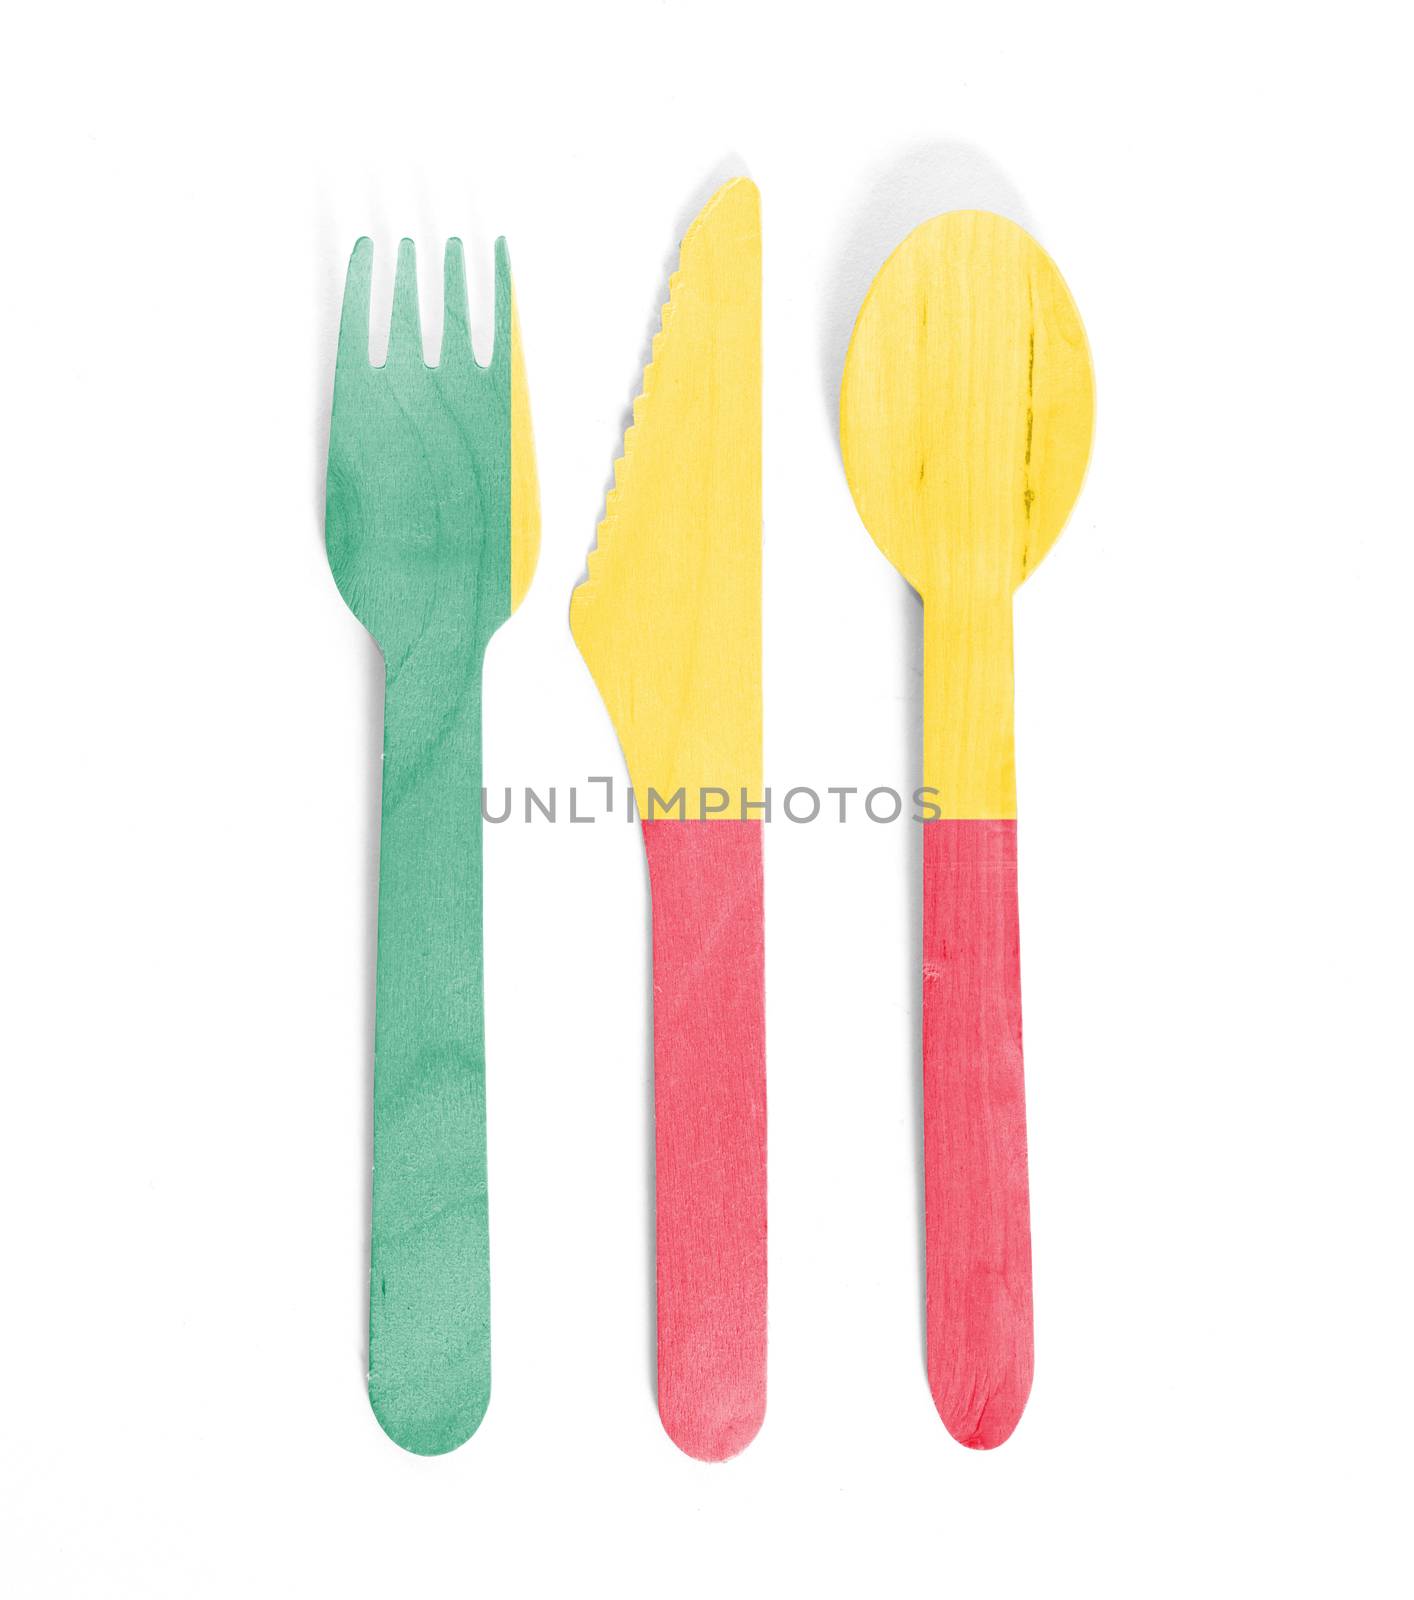 Eco friendly wooden cutlery - Plastic free concept - Isolated - Flag of Benin